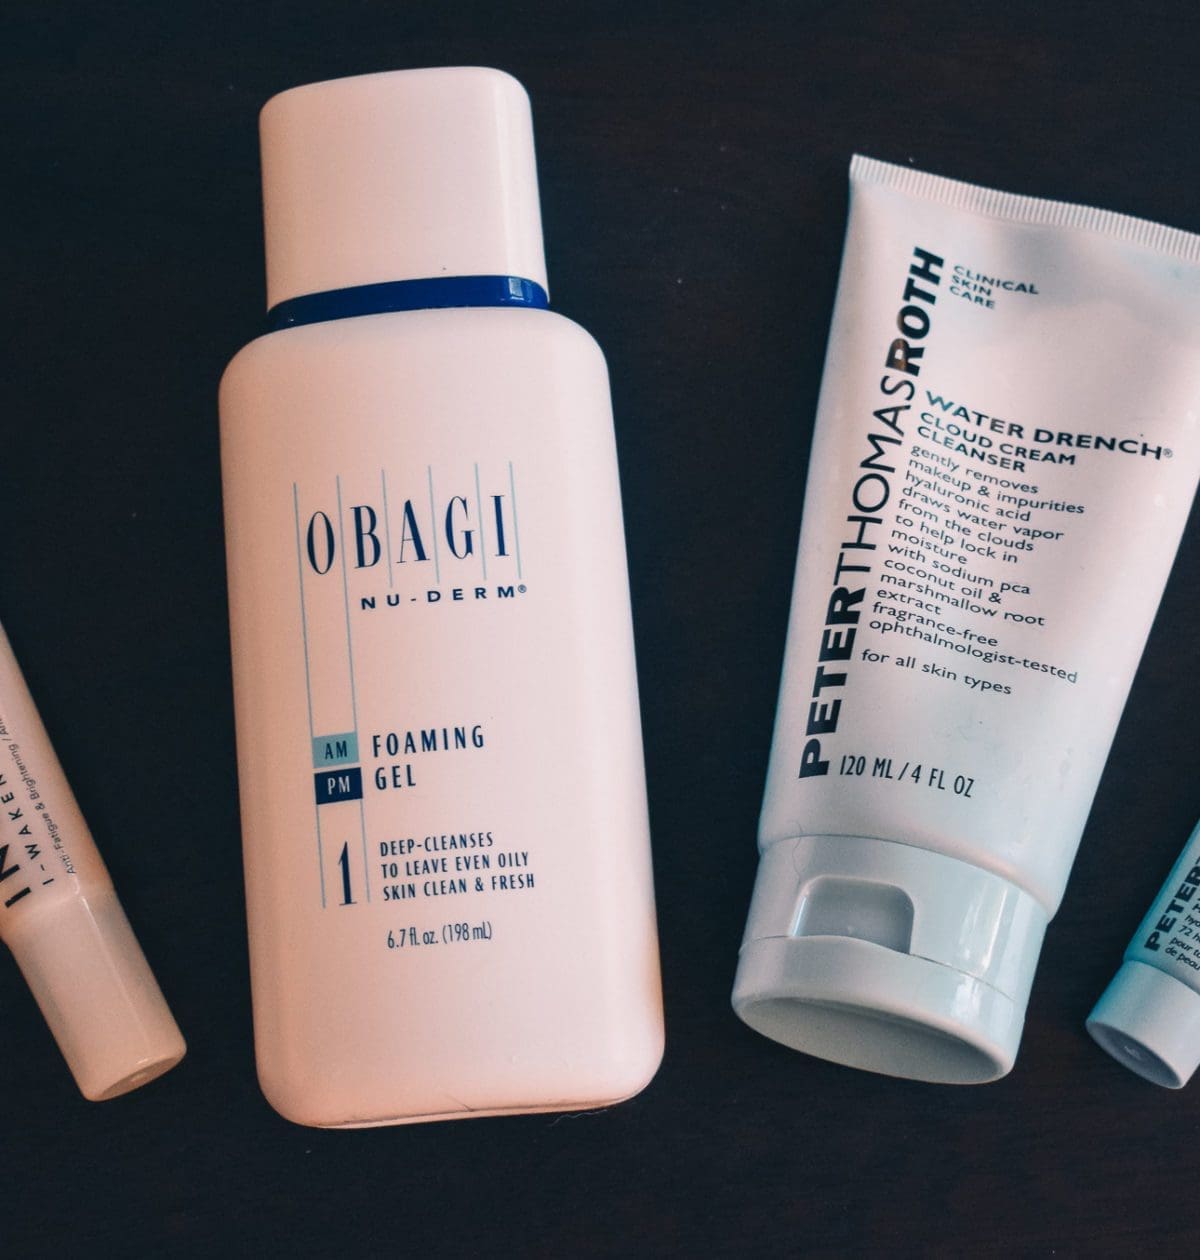 Travel Skincare Essentials, including Obagi Foaming Gel, Peter Thomas Roth Water Drench Cloud Cream Cleanser and Moisturizer, and Indie Lee's I-Waken Eye Serum